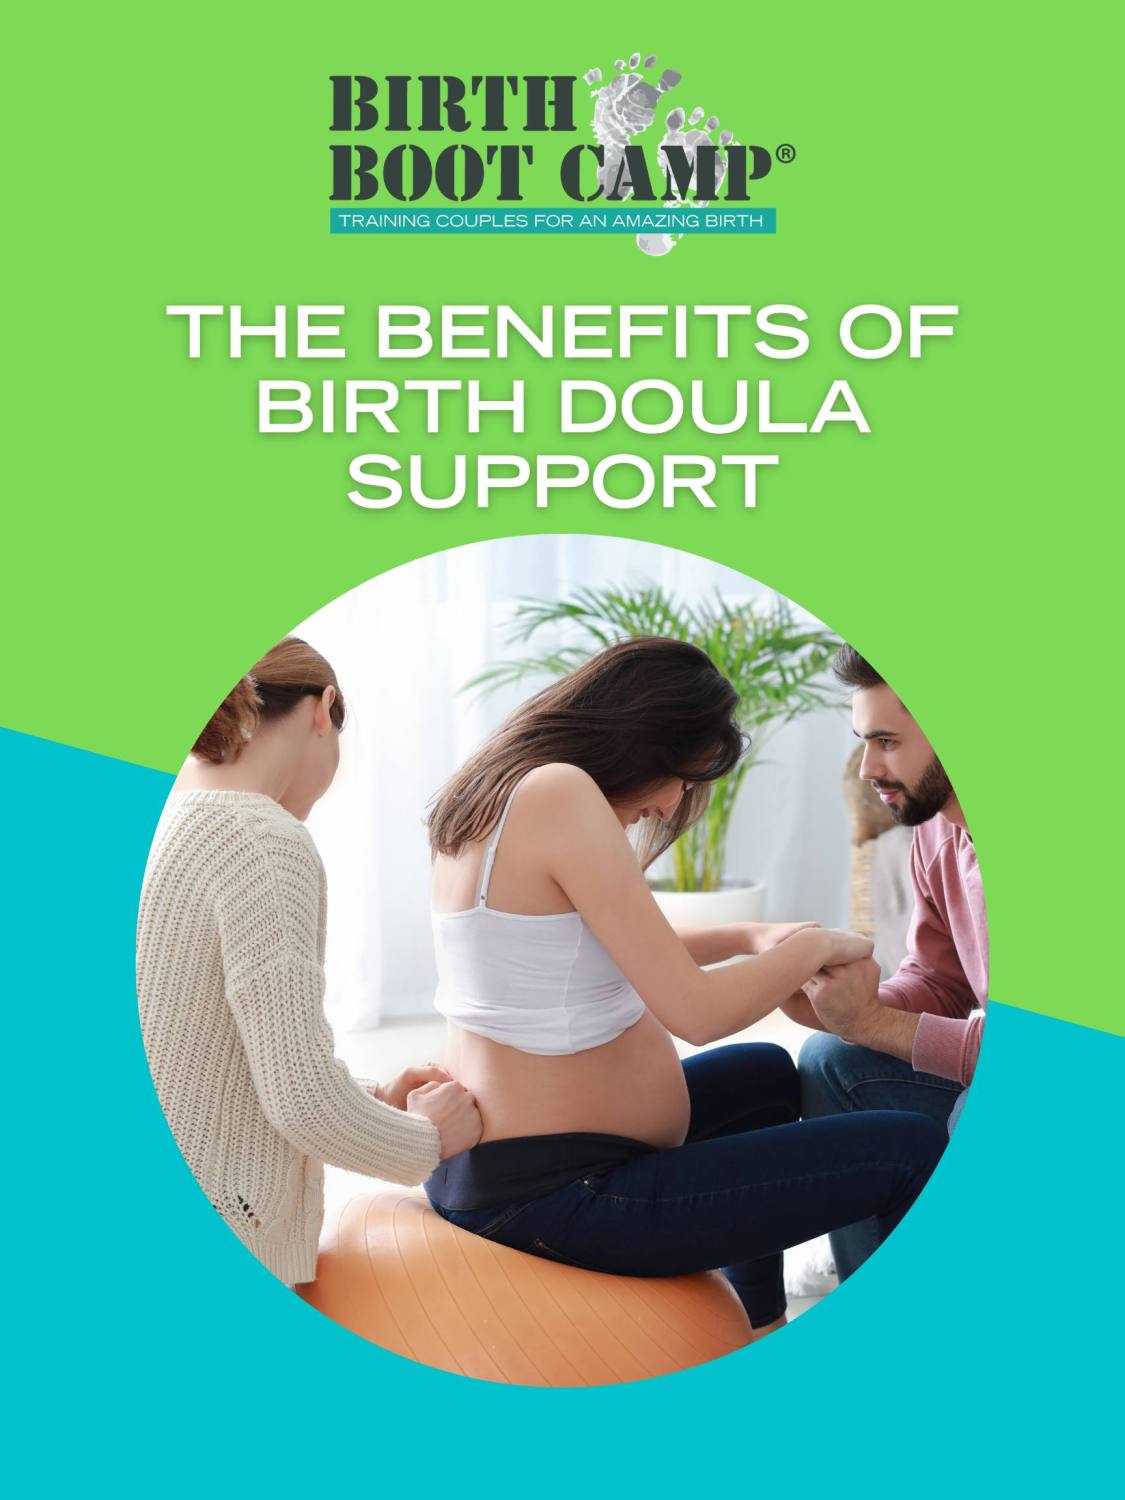 The Benefits of Birth Doula Support